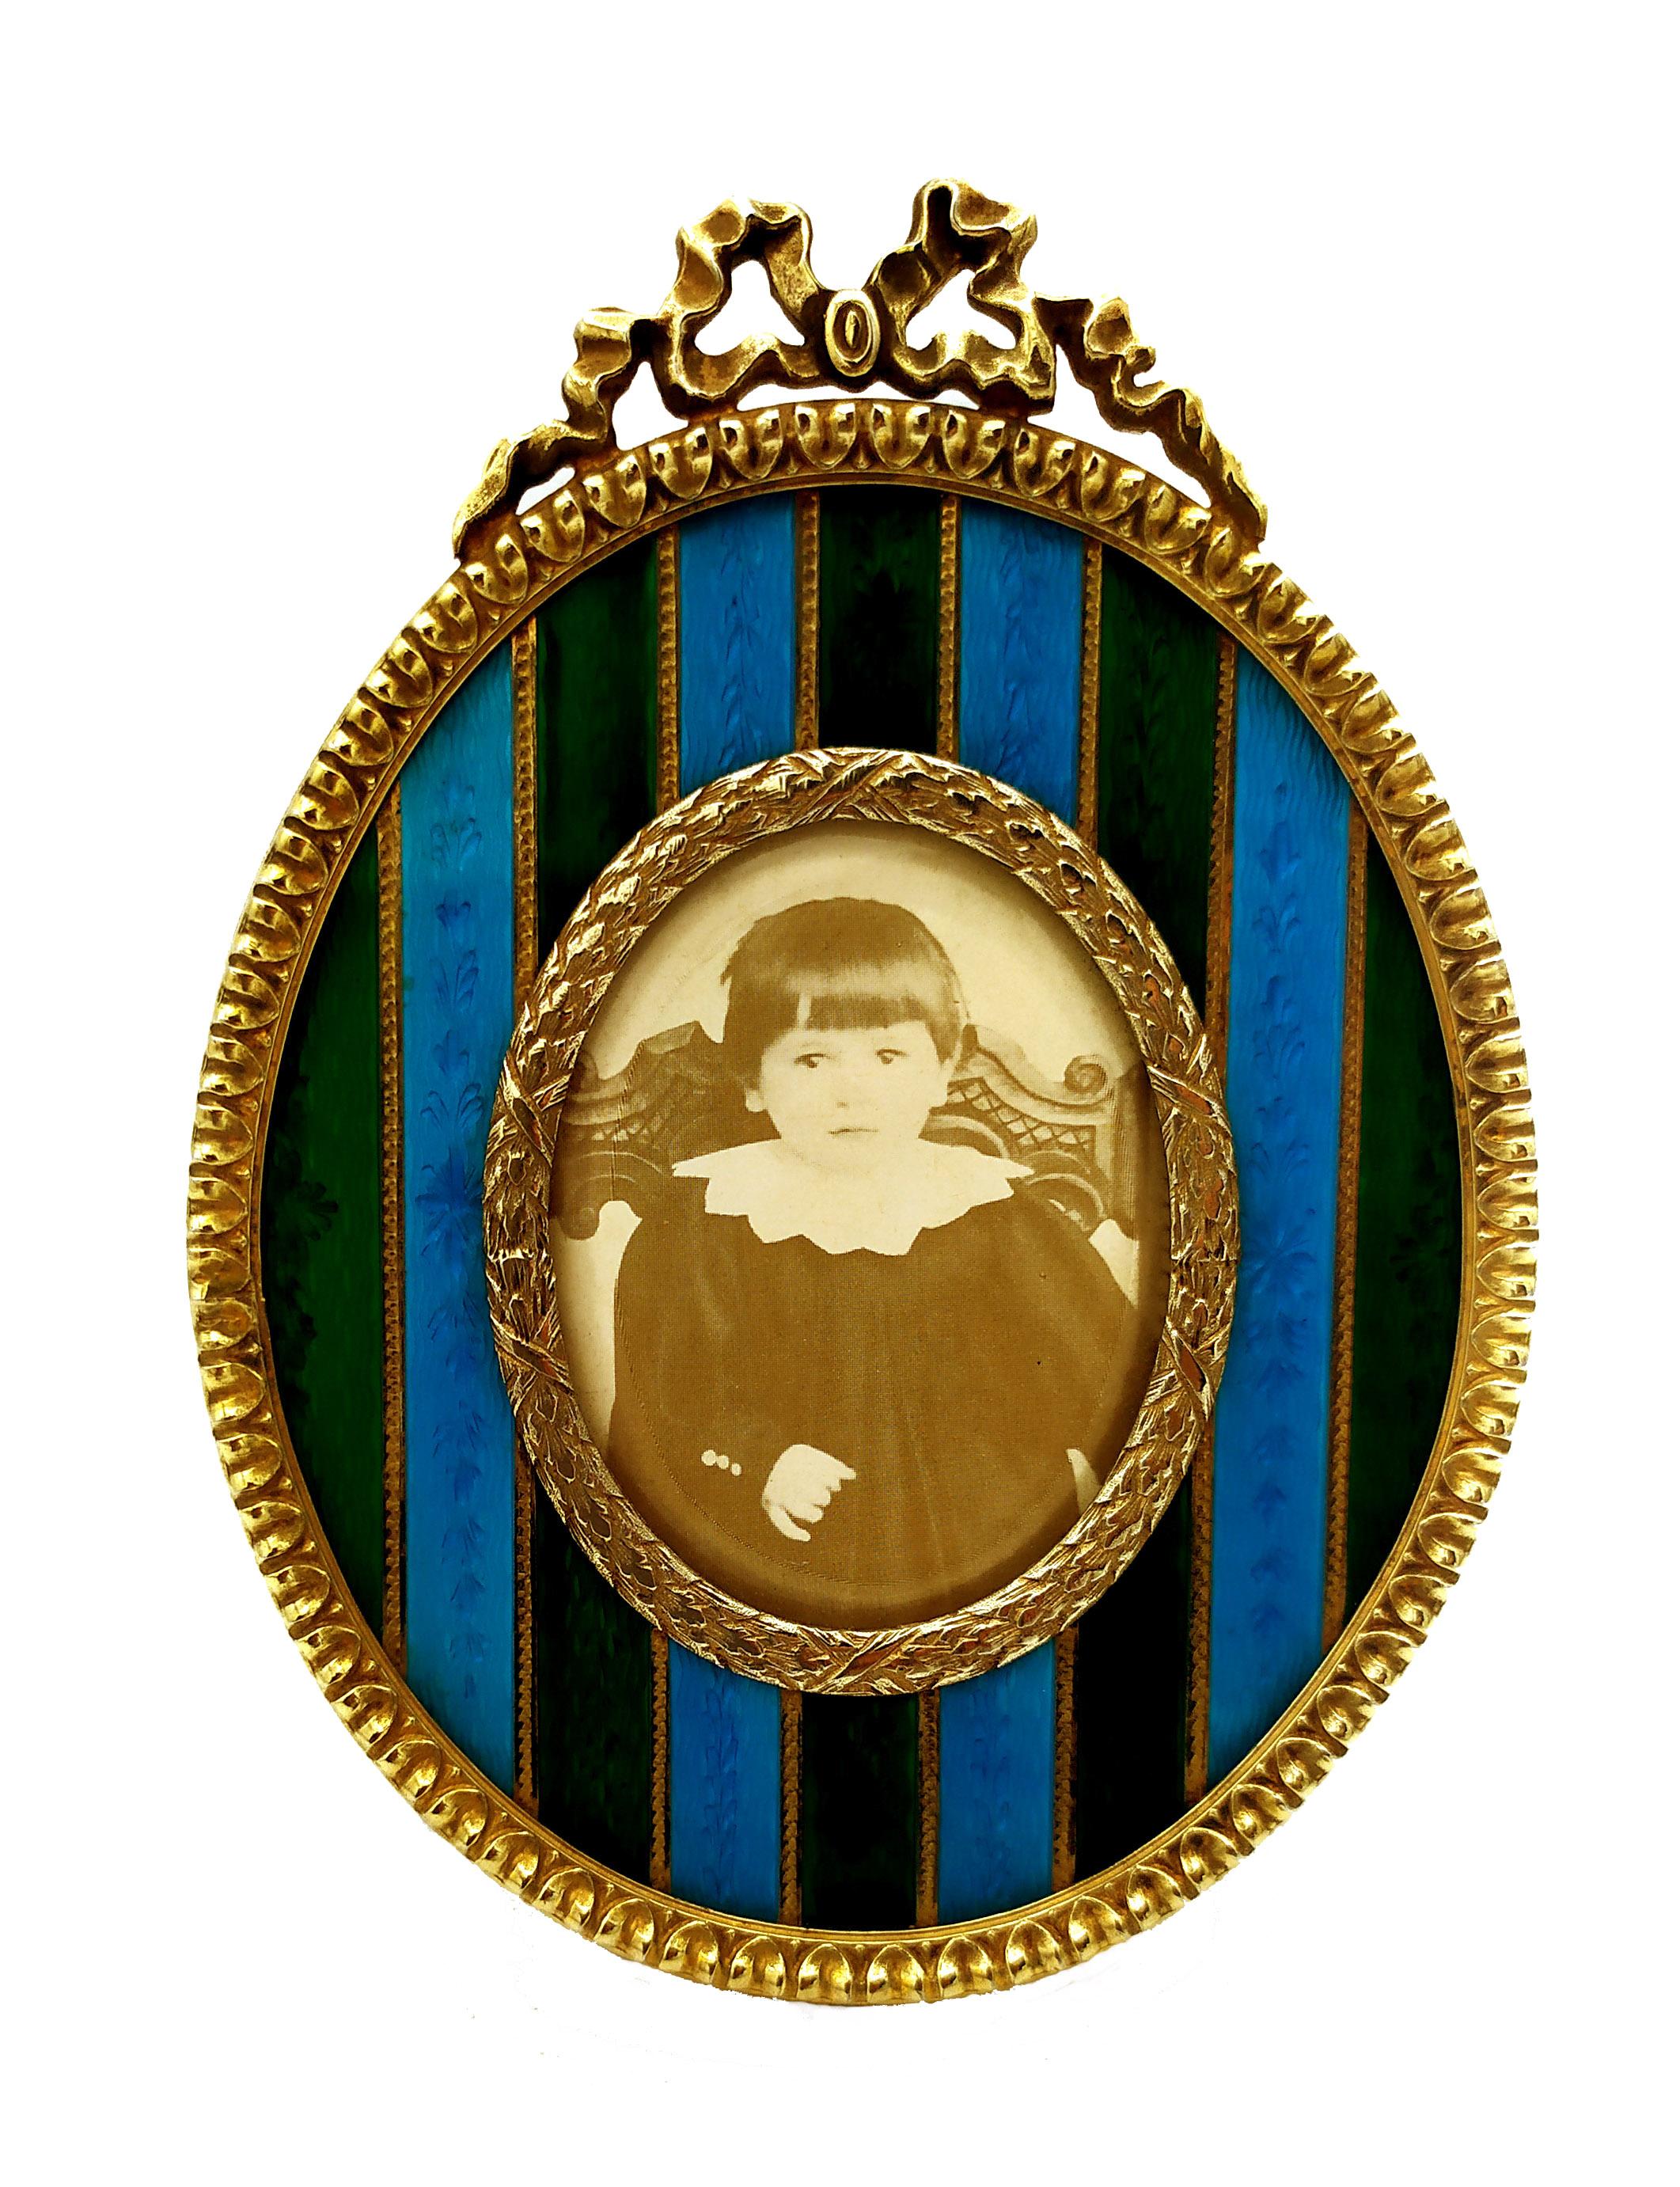 Oval frame  in 925/1000 sterling silver gold plated with two-color translucent strips fire-enameled on guillochè and hand-engraving and with French Empire Napoleon III style ornaments. Outer measure cm. 8.8 x 12 inner cm. 4 x 5.3. Weight gr. 125.